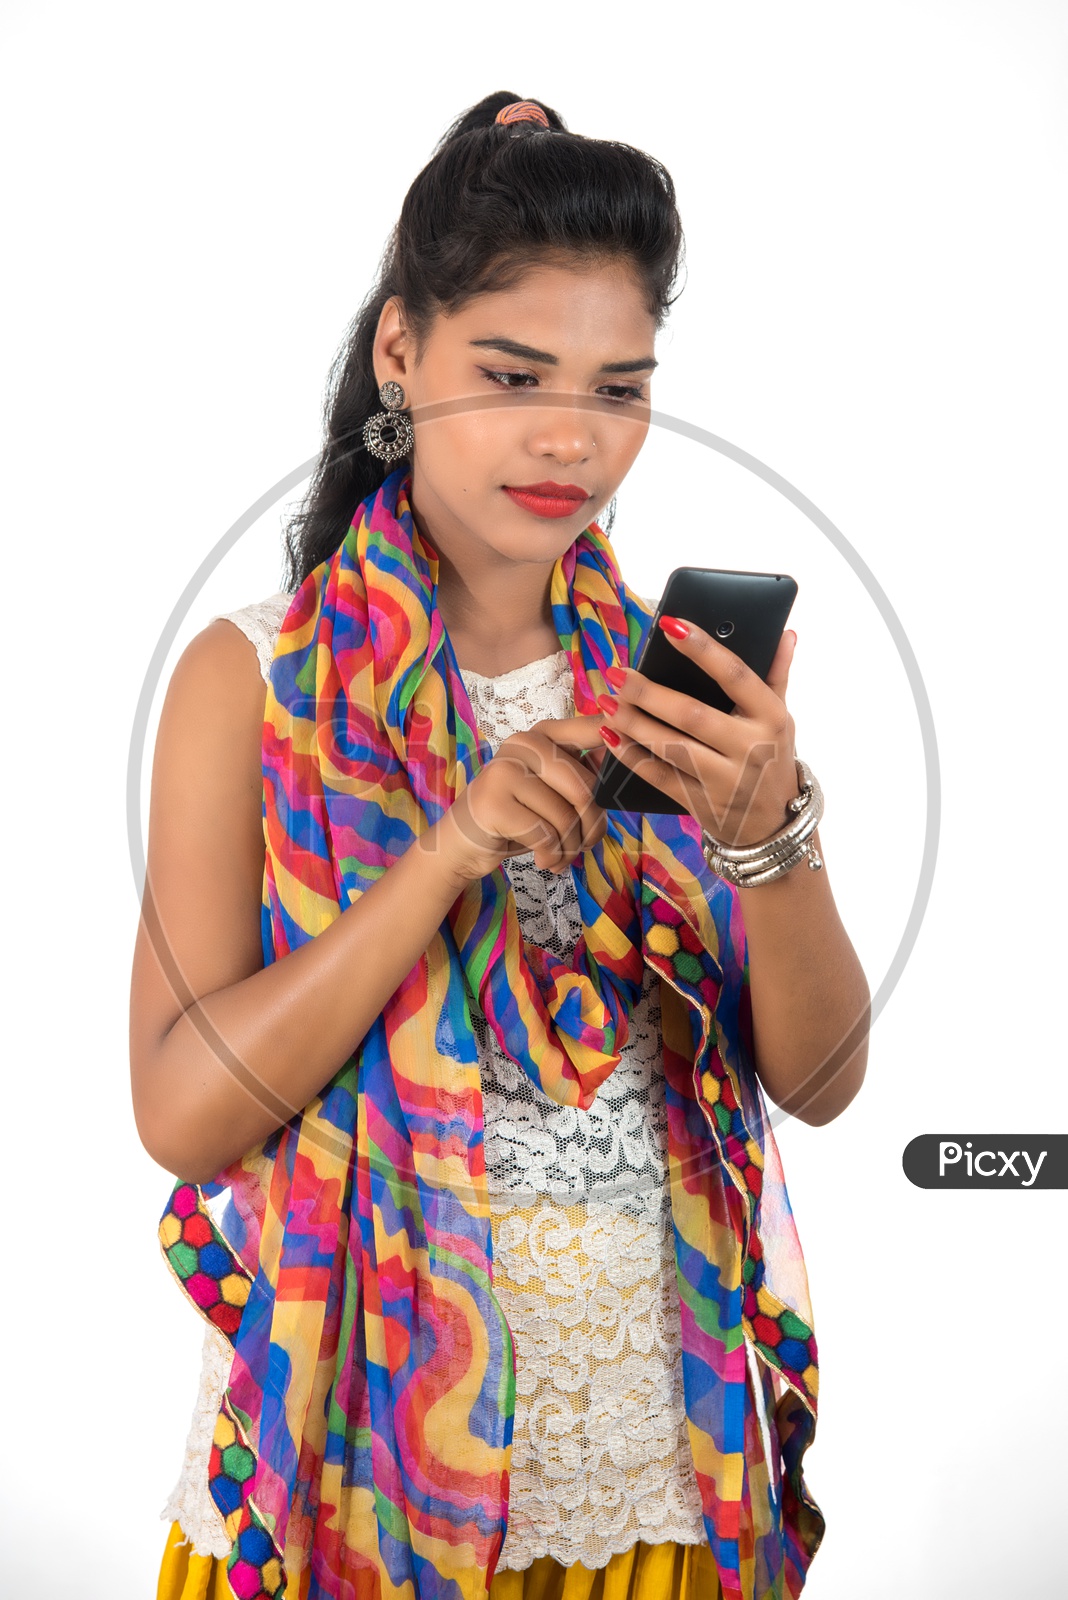 A Happy Young Indian Girl Using Smart Phone With a Smiling Face